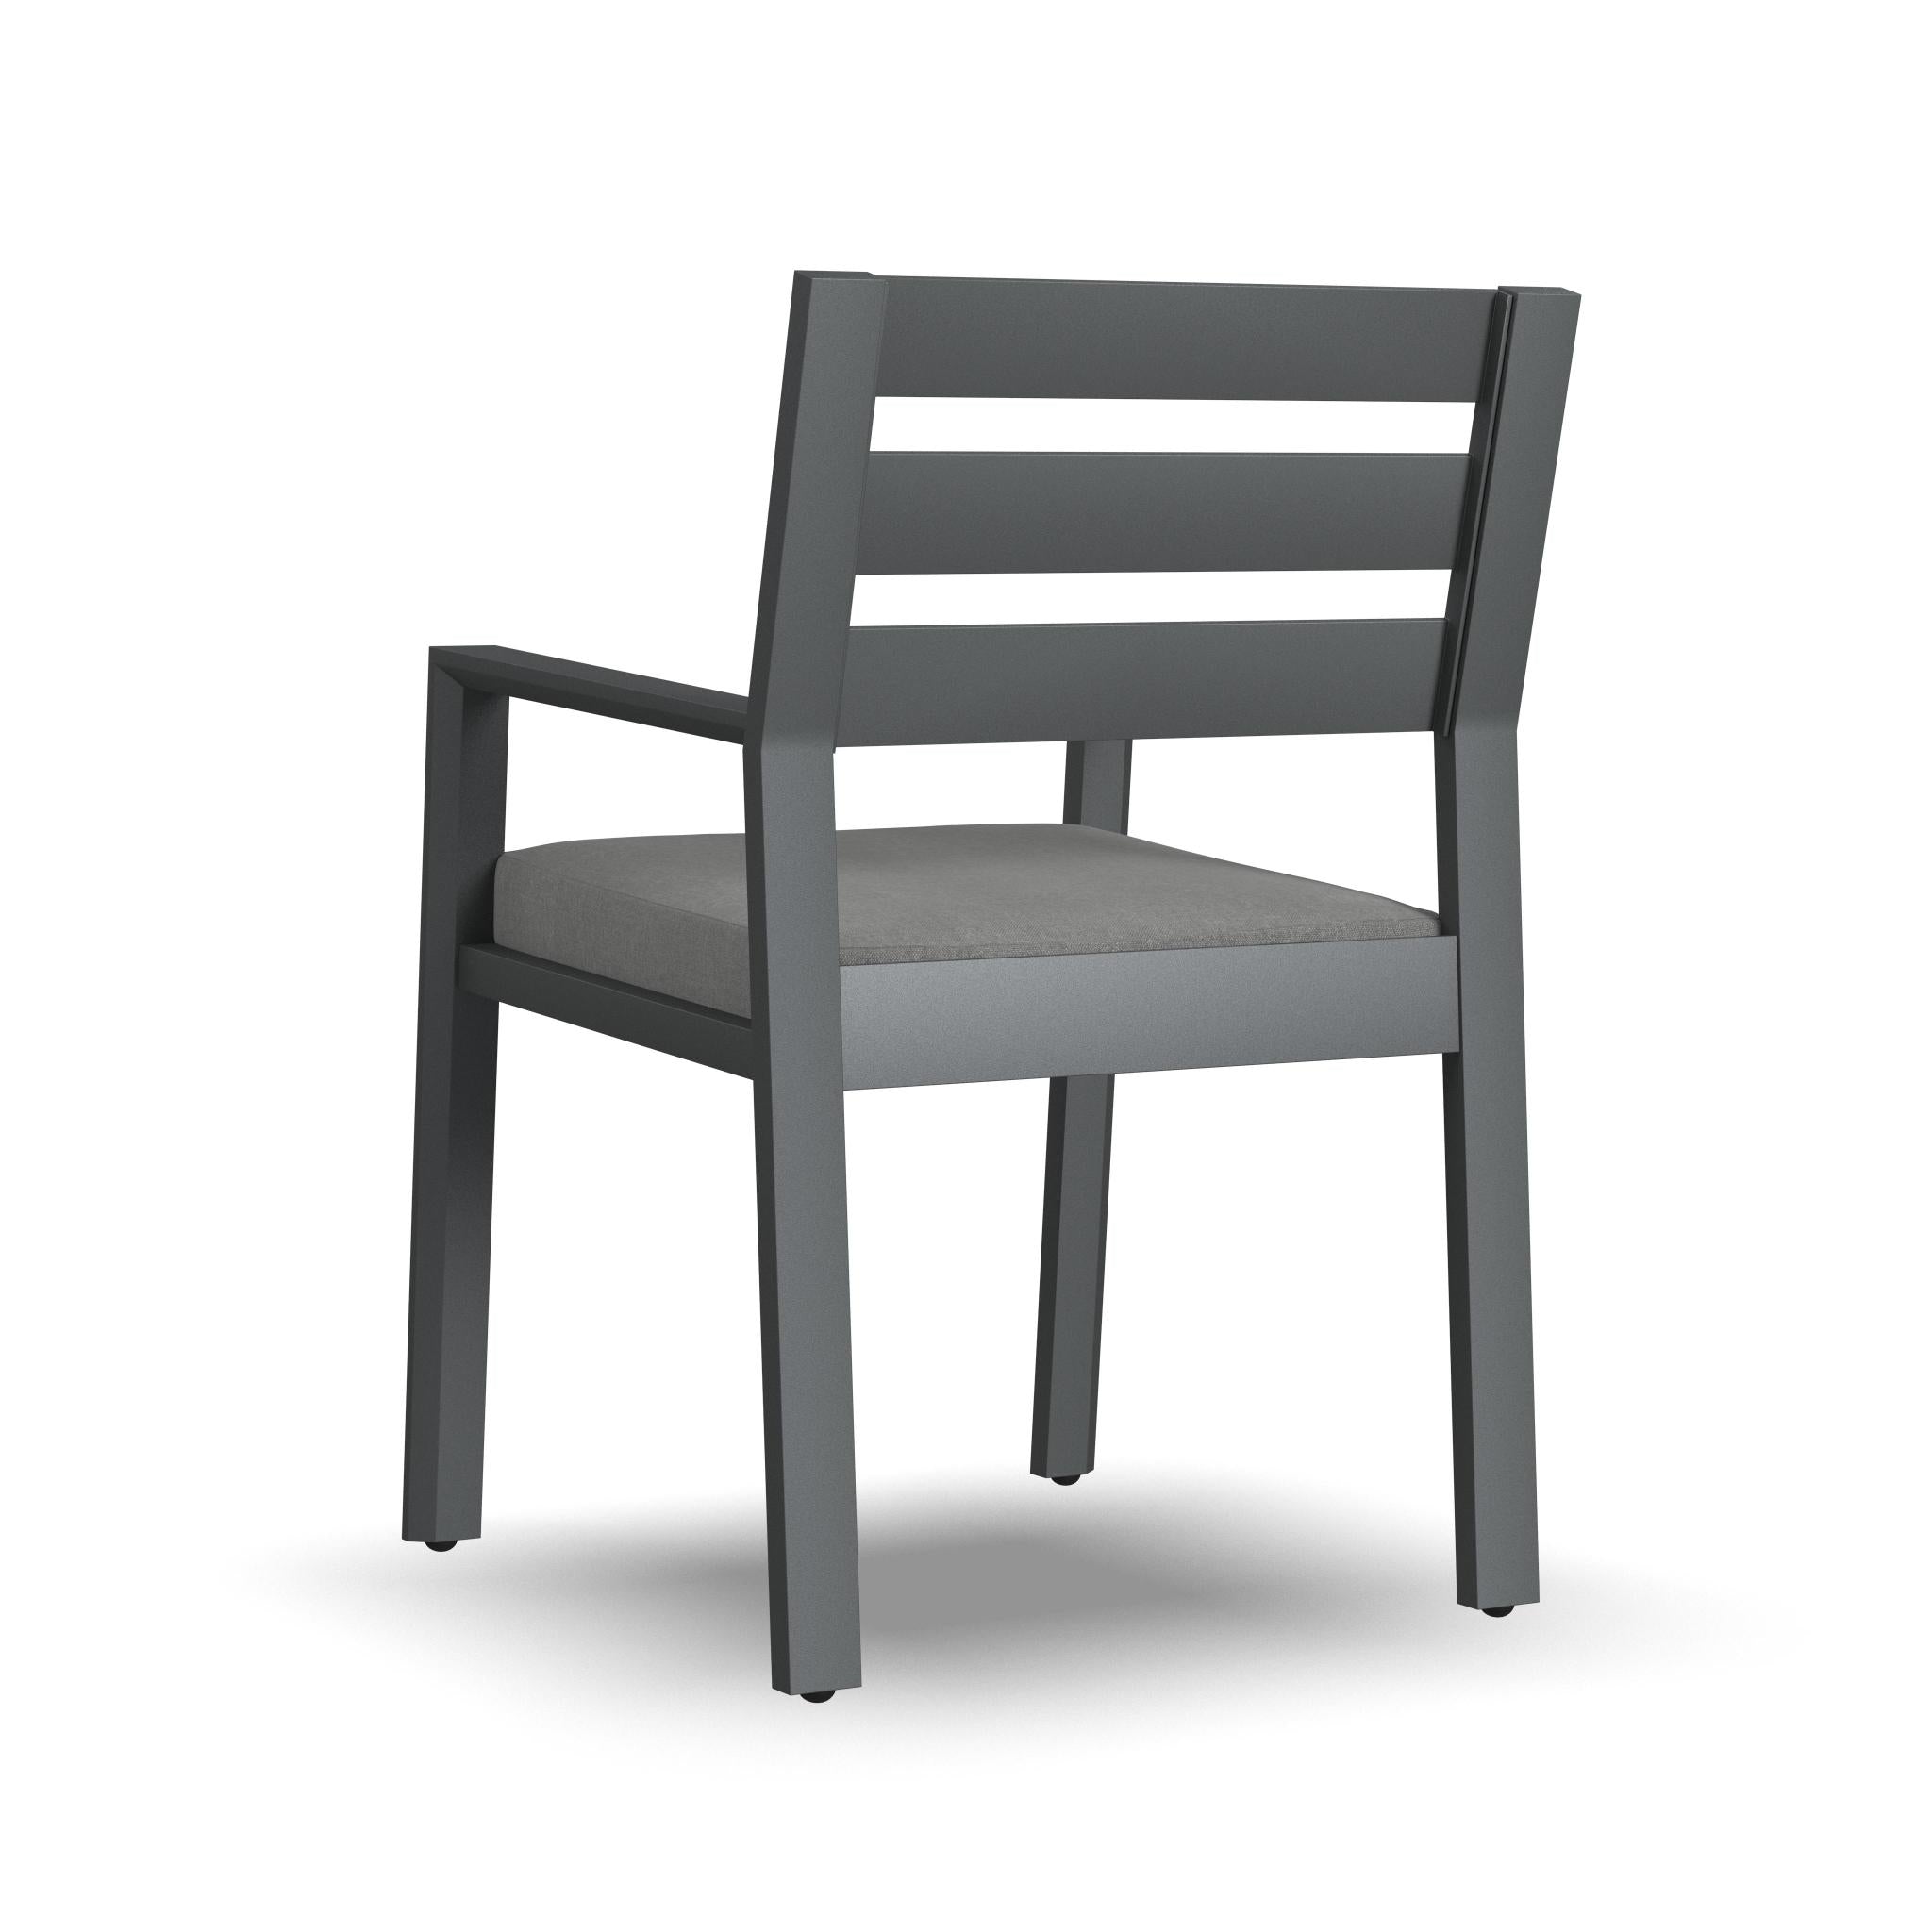 Grayton Pair of Dining Chairs by Homestyles - 6730-102